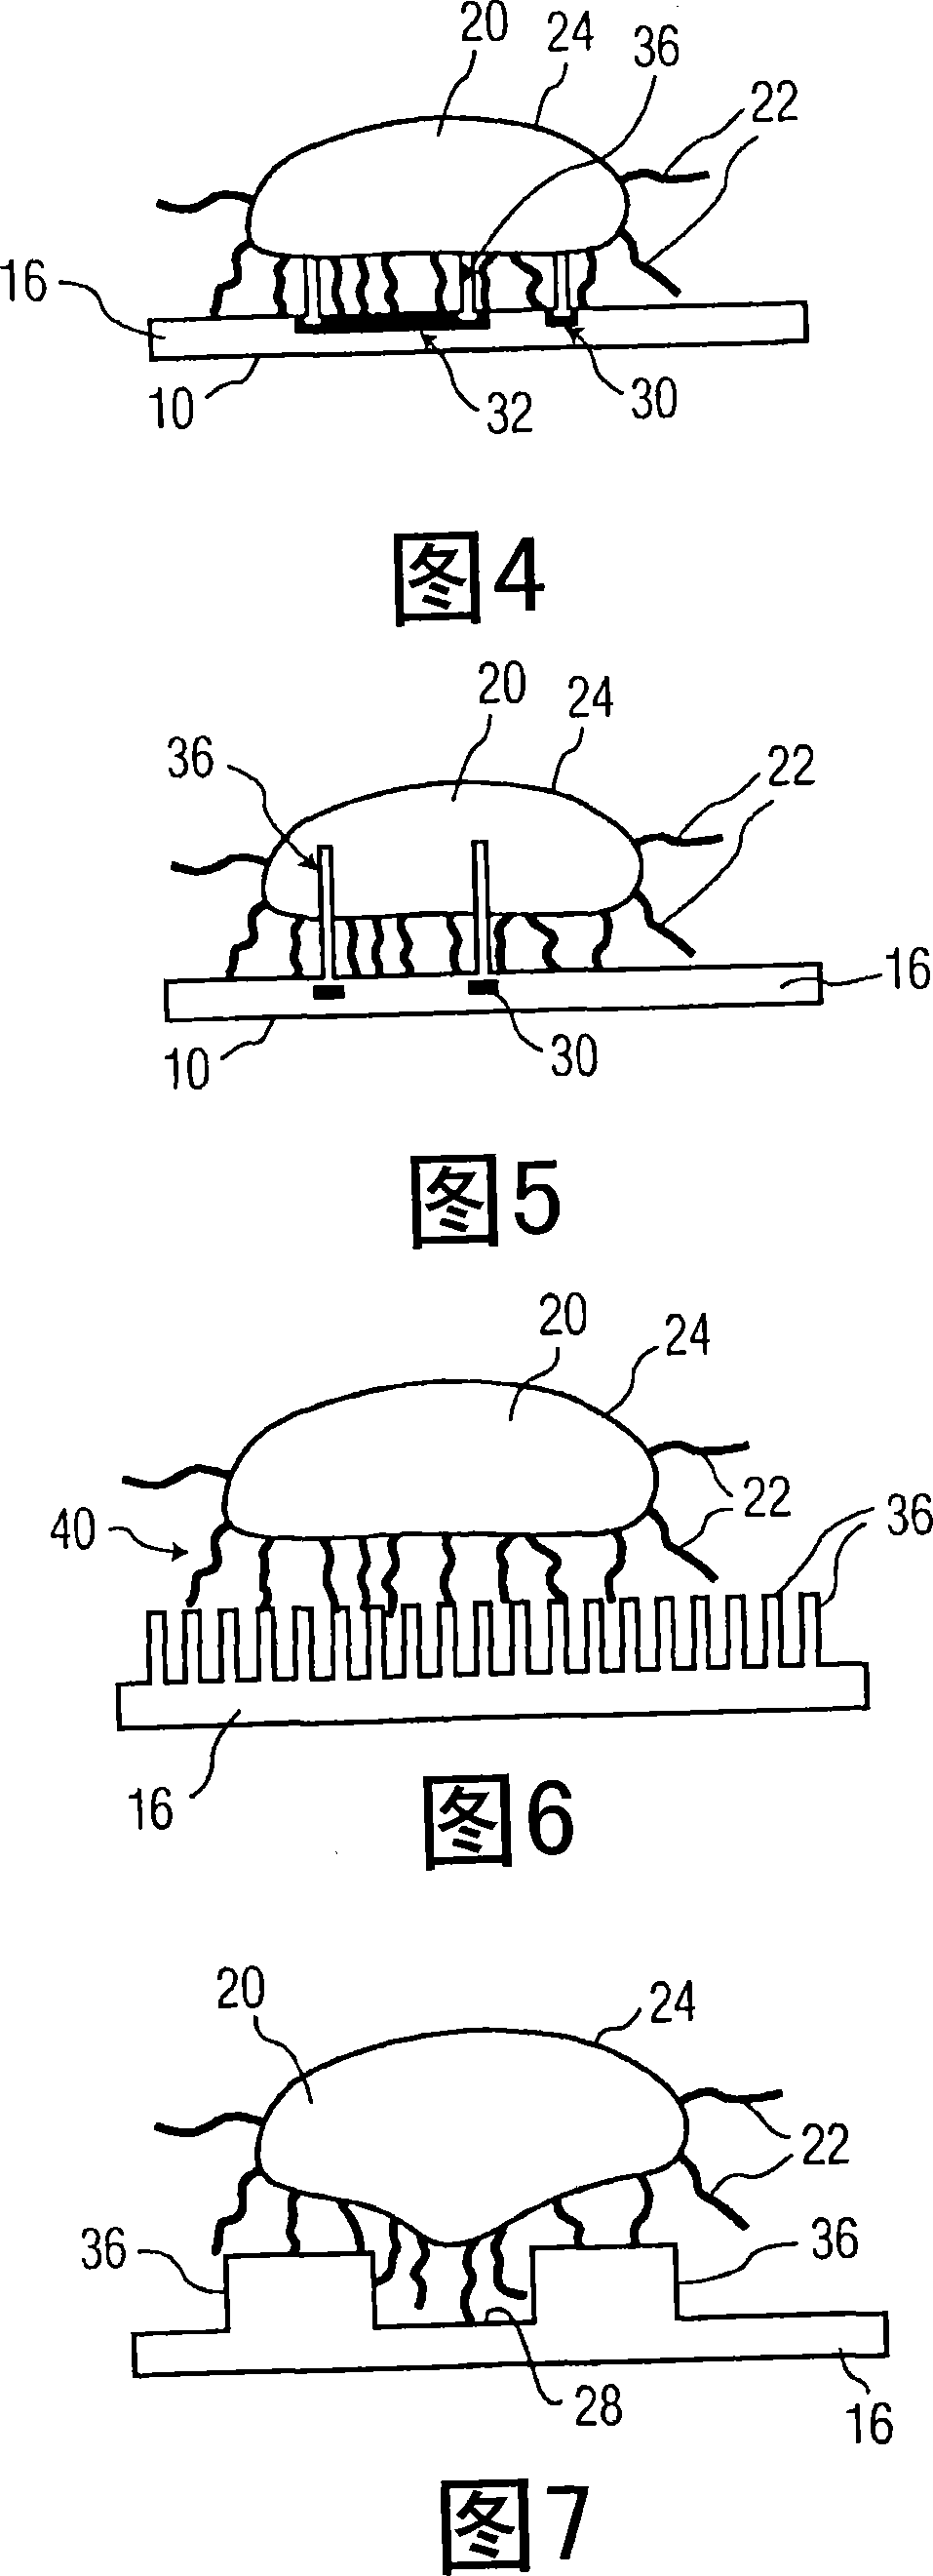 Apparatus and method for coupling implanted electrodes to nervous tissue